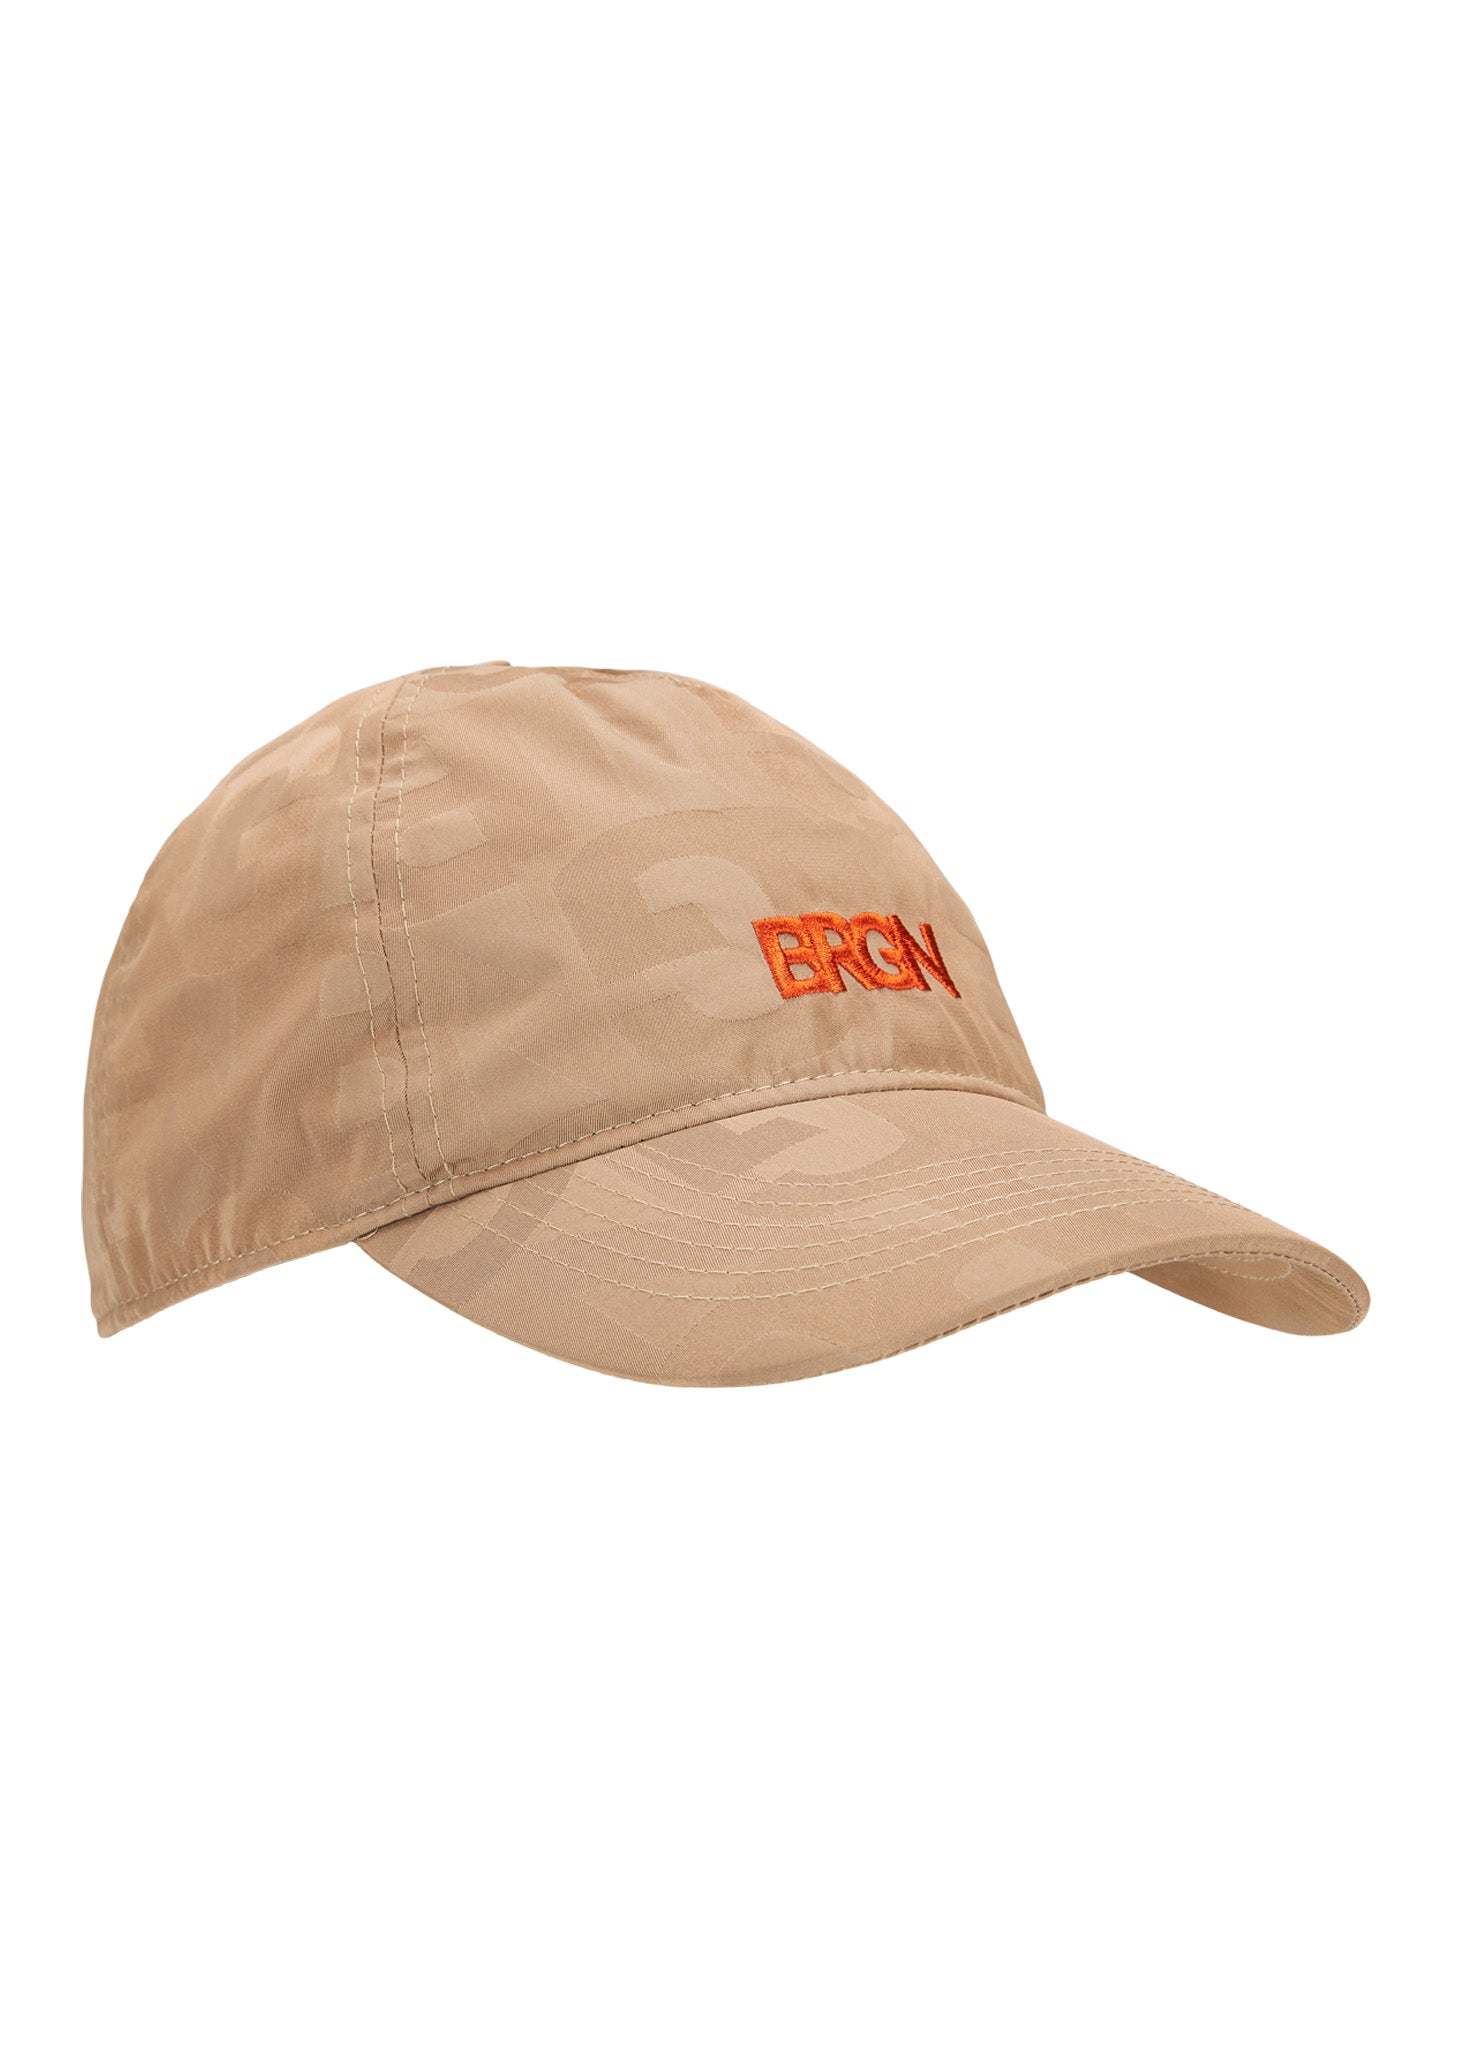 BRGN by Lunde & Gaundal Padded Caps Limited edition Accessories 133 BRGN Sand Jacquard